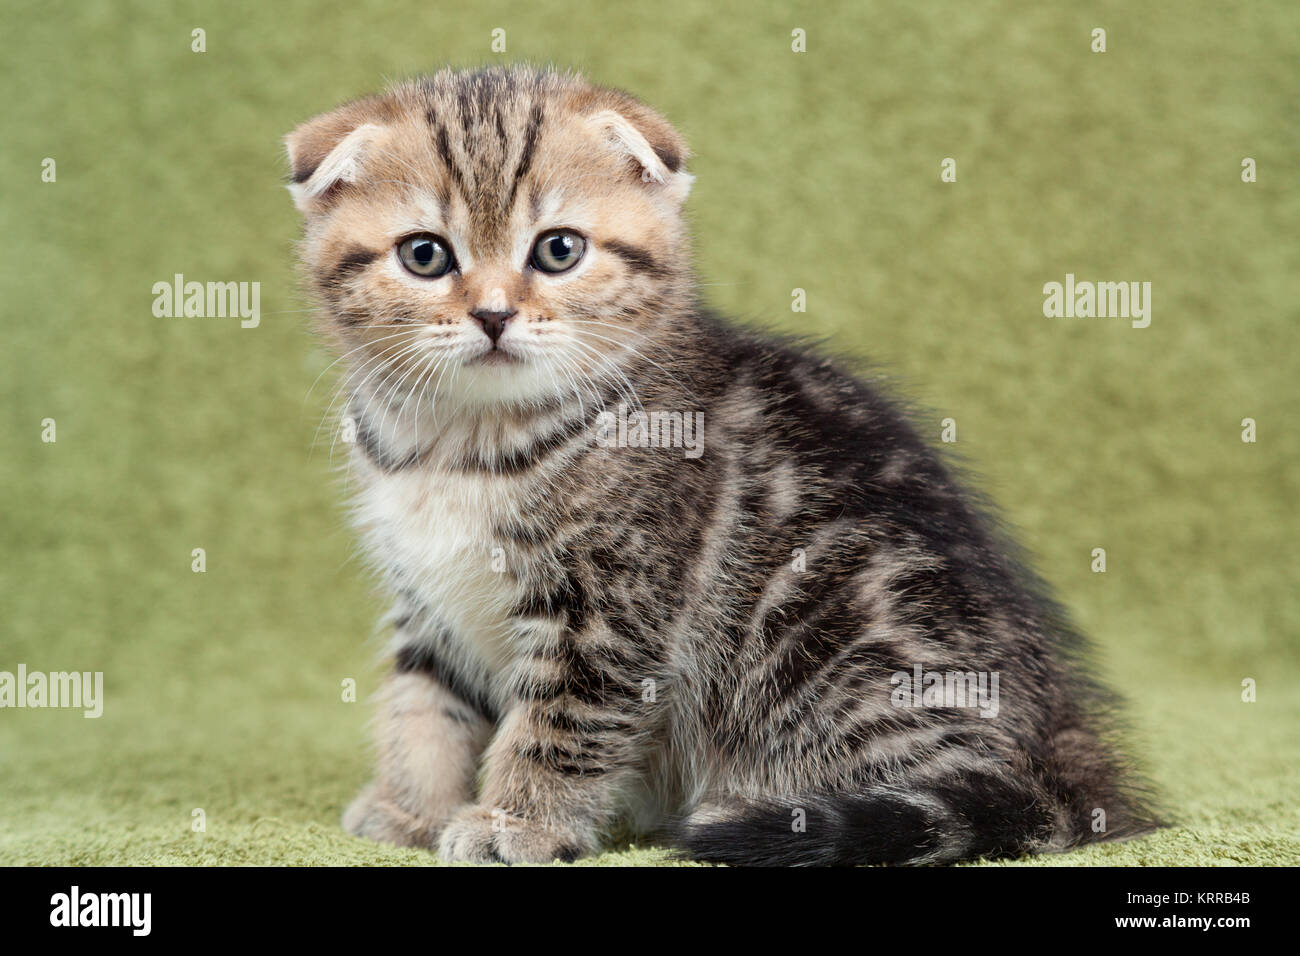 Scottish thoroughbred kitten with three-colored wool at green background Stock Photo